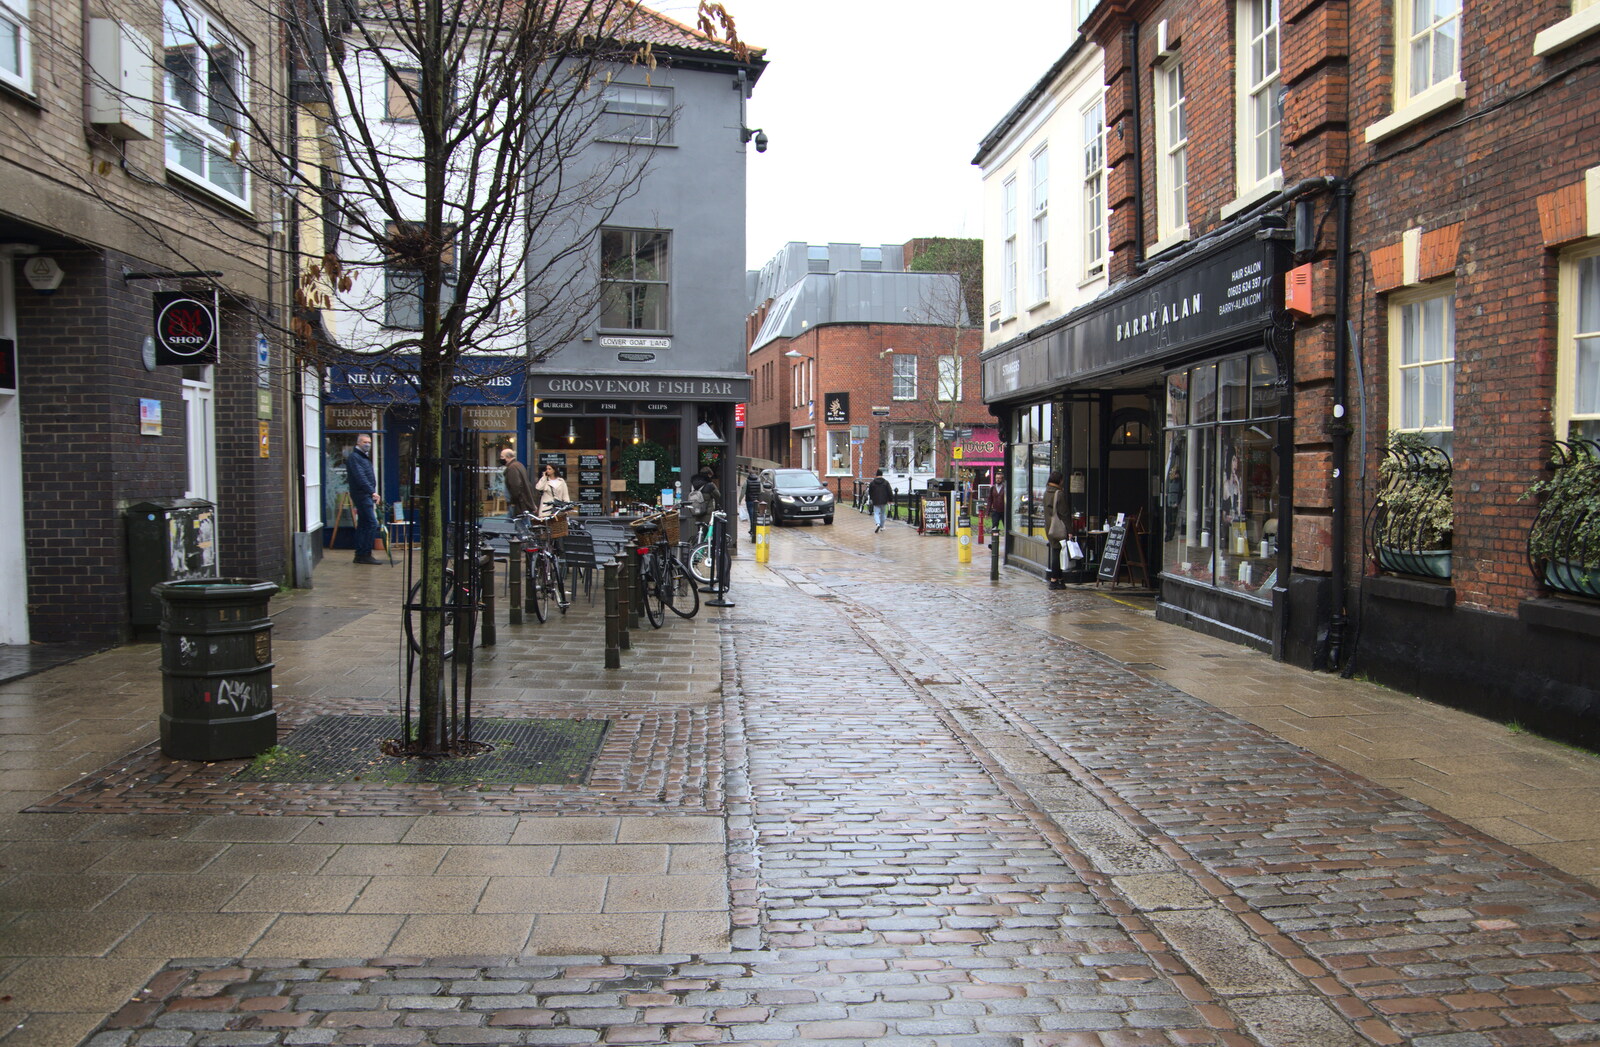 Pottergate and the Grosvenor Fish Bar from A Bit of Christmas Shopping, Norwich, Norfolk - 23rd December 2020